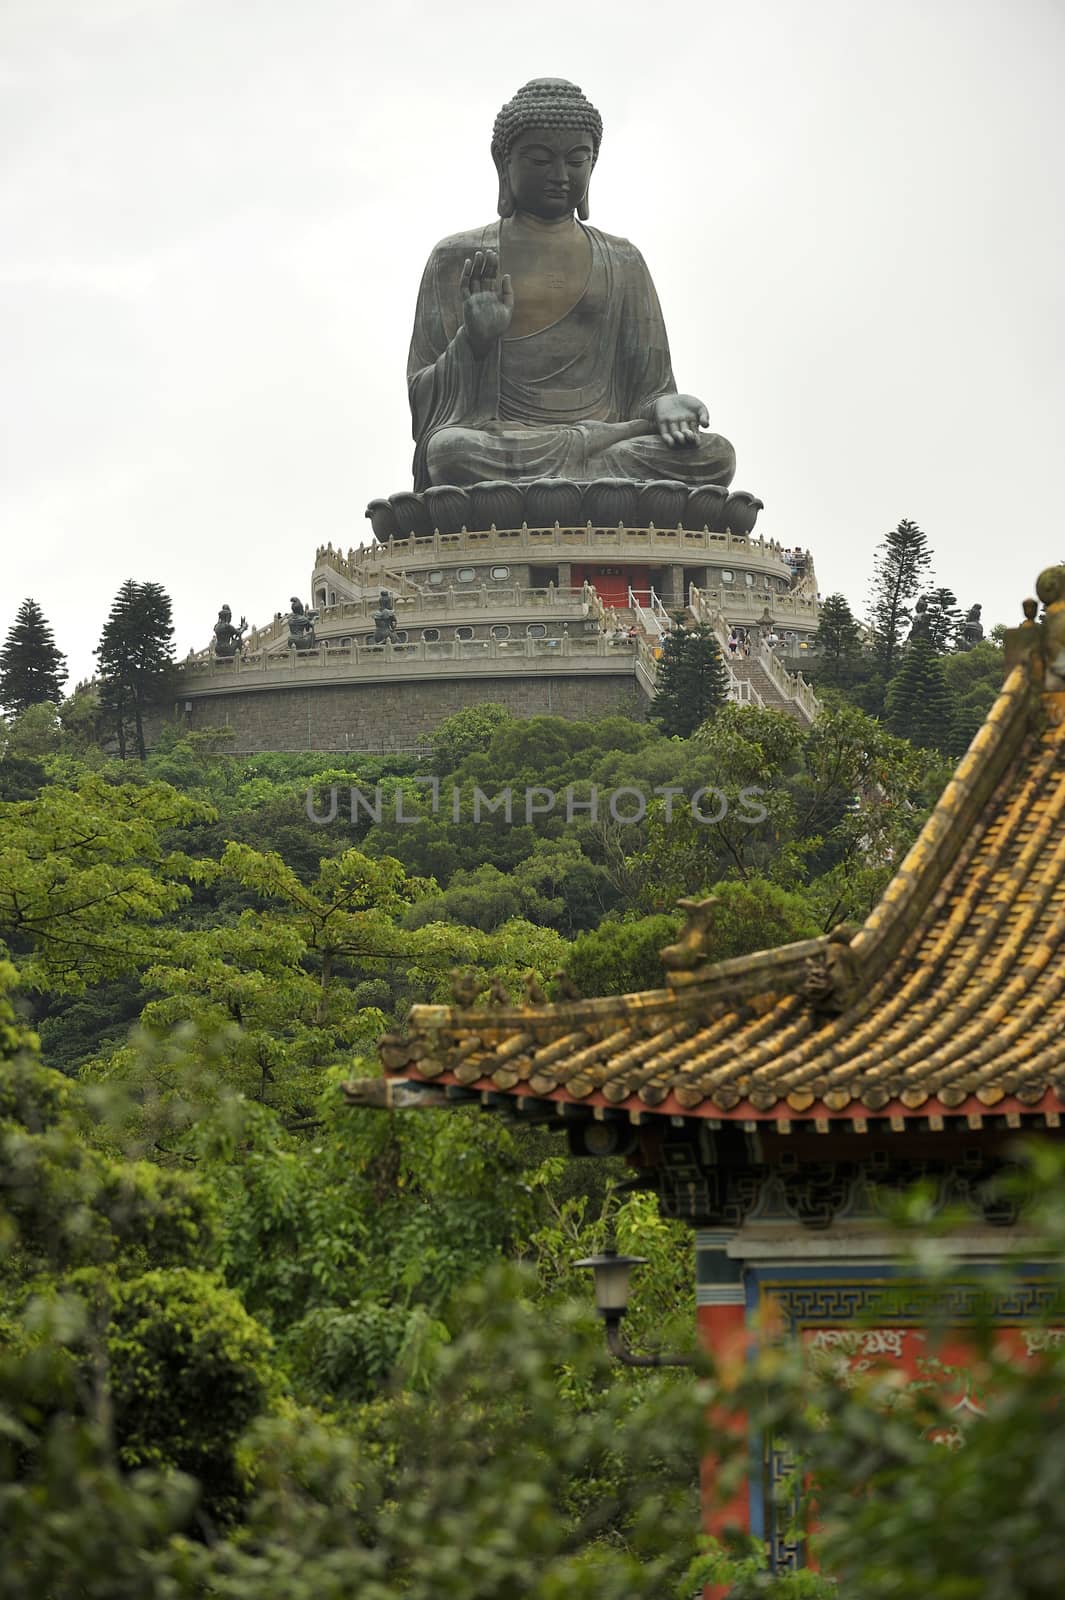 Tian Tan Buddha - The worlds's tallest outdoor seated bronze Bud by think4photop